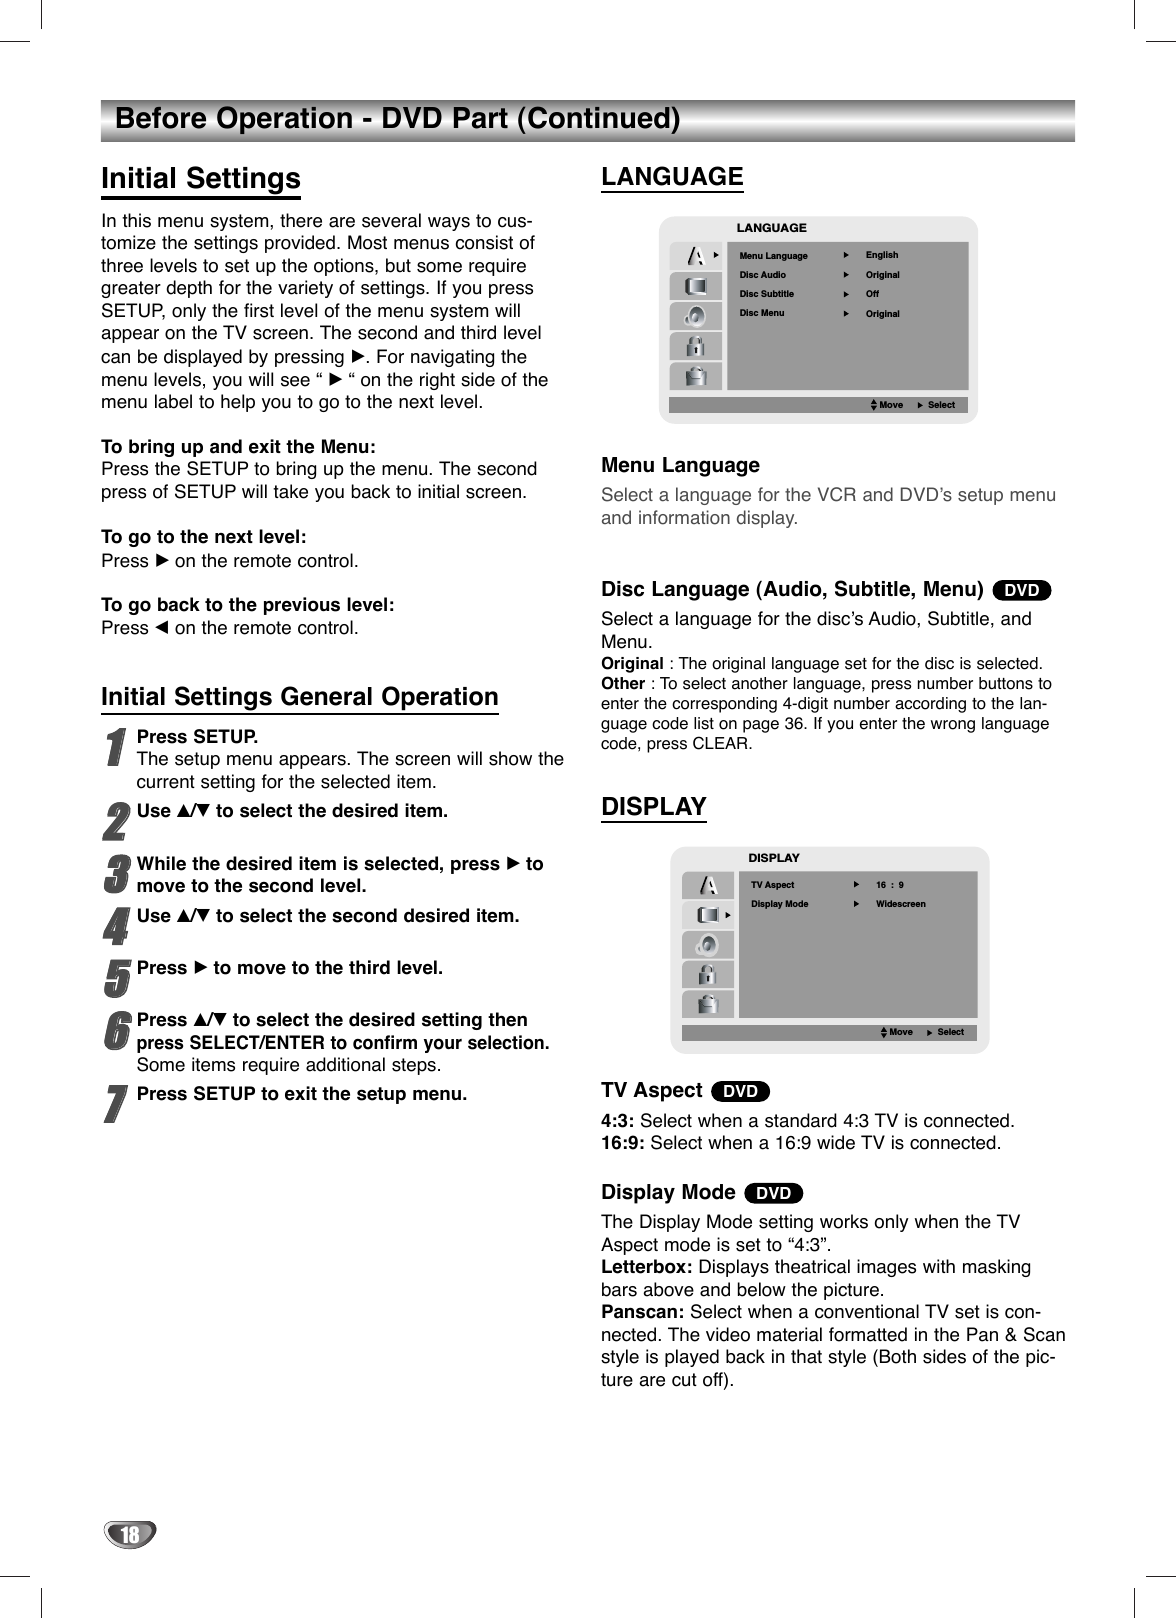 18Before Operation - DVD Part (Continued)Initial SettingsIn this menu system, there are several ways to cus-tomize the settings provided. Most menus consist ofthree levels to set up the options, but some requiregreater depth for the variety of settings. If you pressSETUP, only the first level of the menu system willappear on the TV screen. The second and third levelcan be displayed by pressing B. For navigating themenu levels, you will see “ B“ on the right side of themenu label to help you to go to the next level. To bring up and exit the Menu:Press the SETUP to bring up the menu. The secondpress of SETUP will take you back to initial screen.To go to the next level: Press Bon the remote control. To go back to the previous level:Press bon the remote control. Initial Settings General Operation11Press SETUP.The setup menu appears. The screen will show thecurrent setting for the selected item.22Use v/Vto select the desired item.33While the desired item is selected, press Btomove to the second level.44Use v/Vto select the second desired item.55Press Bto move to the third level.66Press v/Vto select the desired setting thenpress SELECT/ENTER to confirm your selection.Some items require additional steps.77Press SETUP to exit the setup menu.LANGUAGEMenu LanguageSelect a language for the VCR and DVD’s setup menuand information display. Disc Language (Audio, Subtitle, Menu) Select a language for the disc’s Audio, Subtitle, andMenu.Original : The original language set for the disc is selected.Other : To select another language, press number buttons toenter the corresponding 4-digit number according to the lan-guage code list on page 36. If you enter the wrong languagecode, press CLEAR.DISPLAYTV Aspect 4:3: Select when a standard 4:3 TV is connected.16:9: Select when a 16:9 wide TV is connected.Display Mode The Display Mode setting works only when the TVAspect mode is set to “4:3”.Letterbox: Displays theatrical images with maskingbars above and below the picture.Panscan: Select when a conventional TV set is con-nected. The video material formatted in the Pan &amp; Scanstyle is played back in that style (Both sides of the pic-ture are cut off).DVDDVDDVDLANGUAGEMenu LanguageOriginalEnglishOffOriginalDisc AudioDisc Subtitle   Disc MenuMoveSelectDISPLAY  TV AspectWidescreen16  :  9Display ModeMoveSelect         